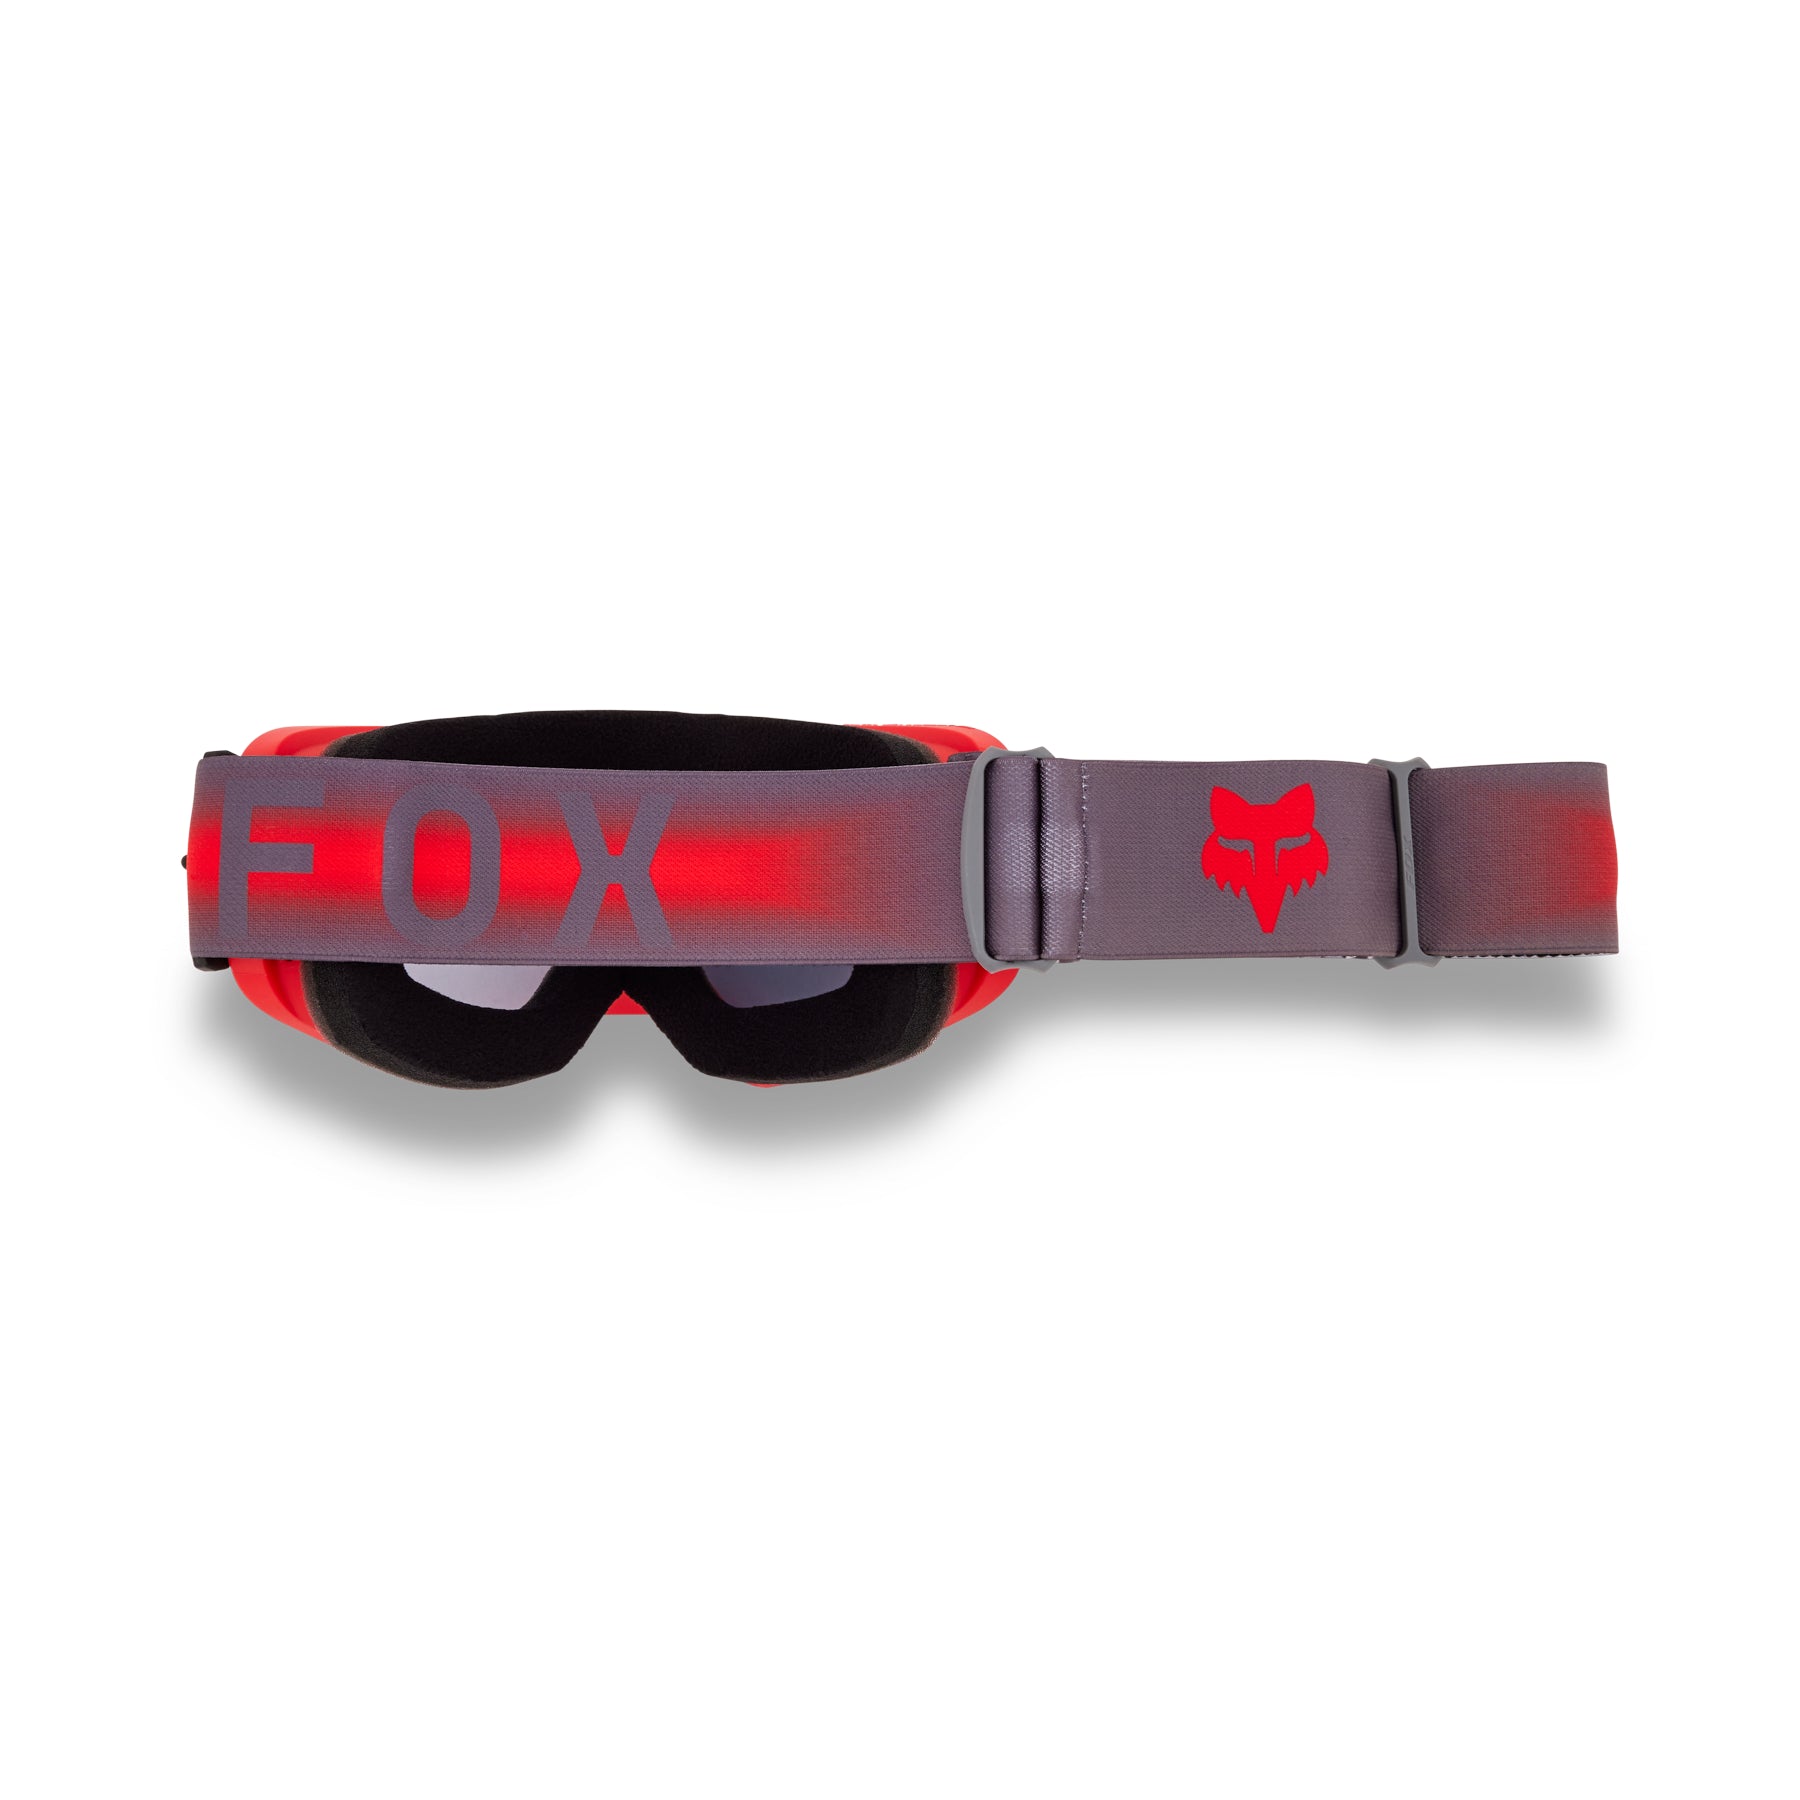 Fox Main Interfere Goggles - One Size Fits Most - Flo Red - Smoke Grey Lens - Image 2